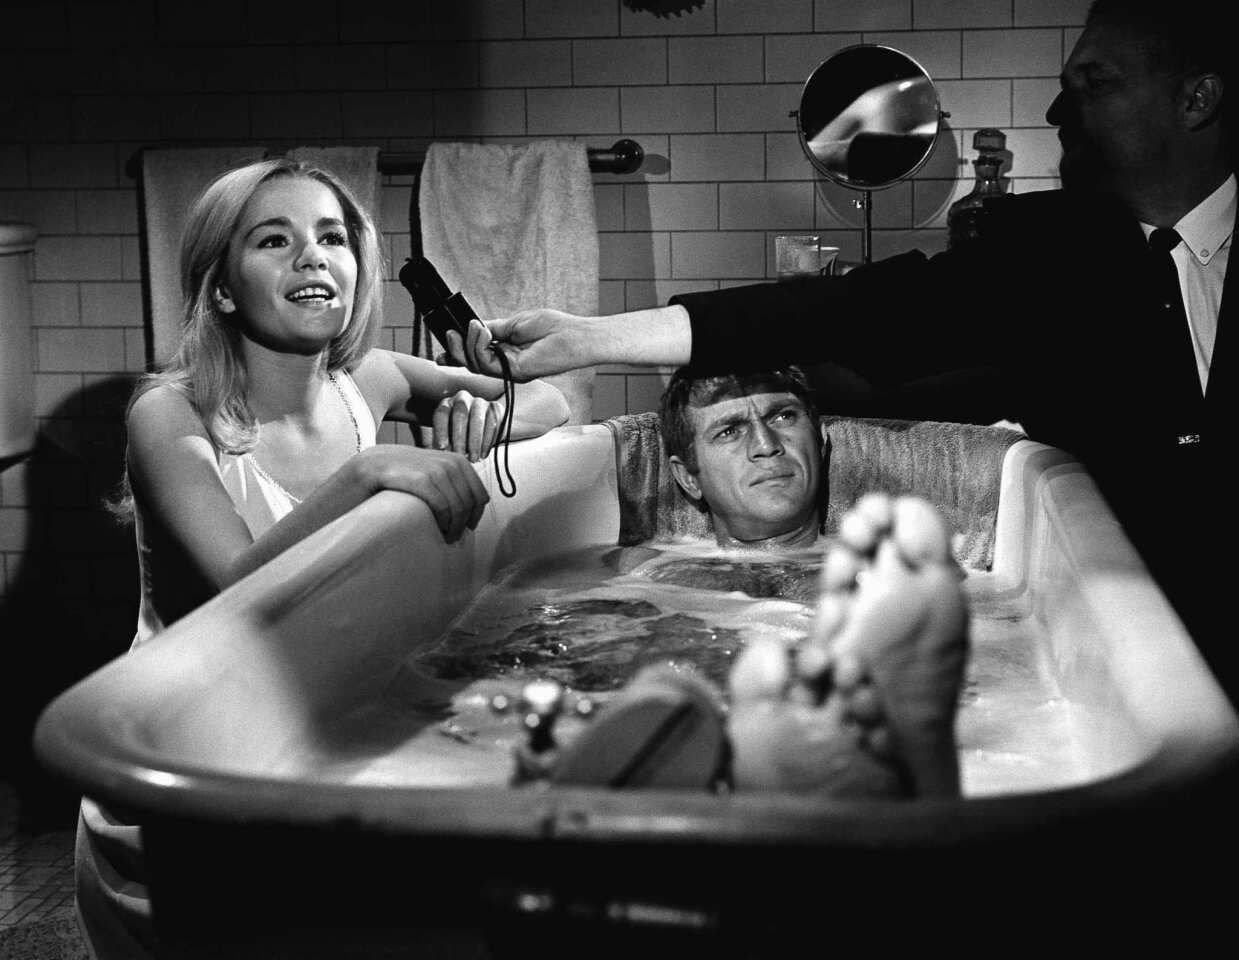 Tuesday Weld and Steve McQueen on the set of "The Cincinnati Kid" in 1965. Cameraman Phil Lathrop is taking a light meter reading before filming the scene.